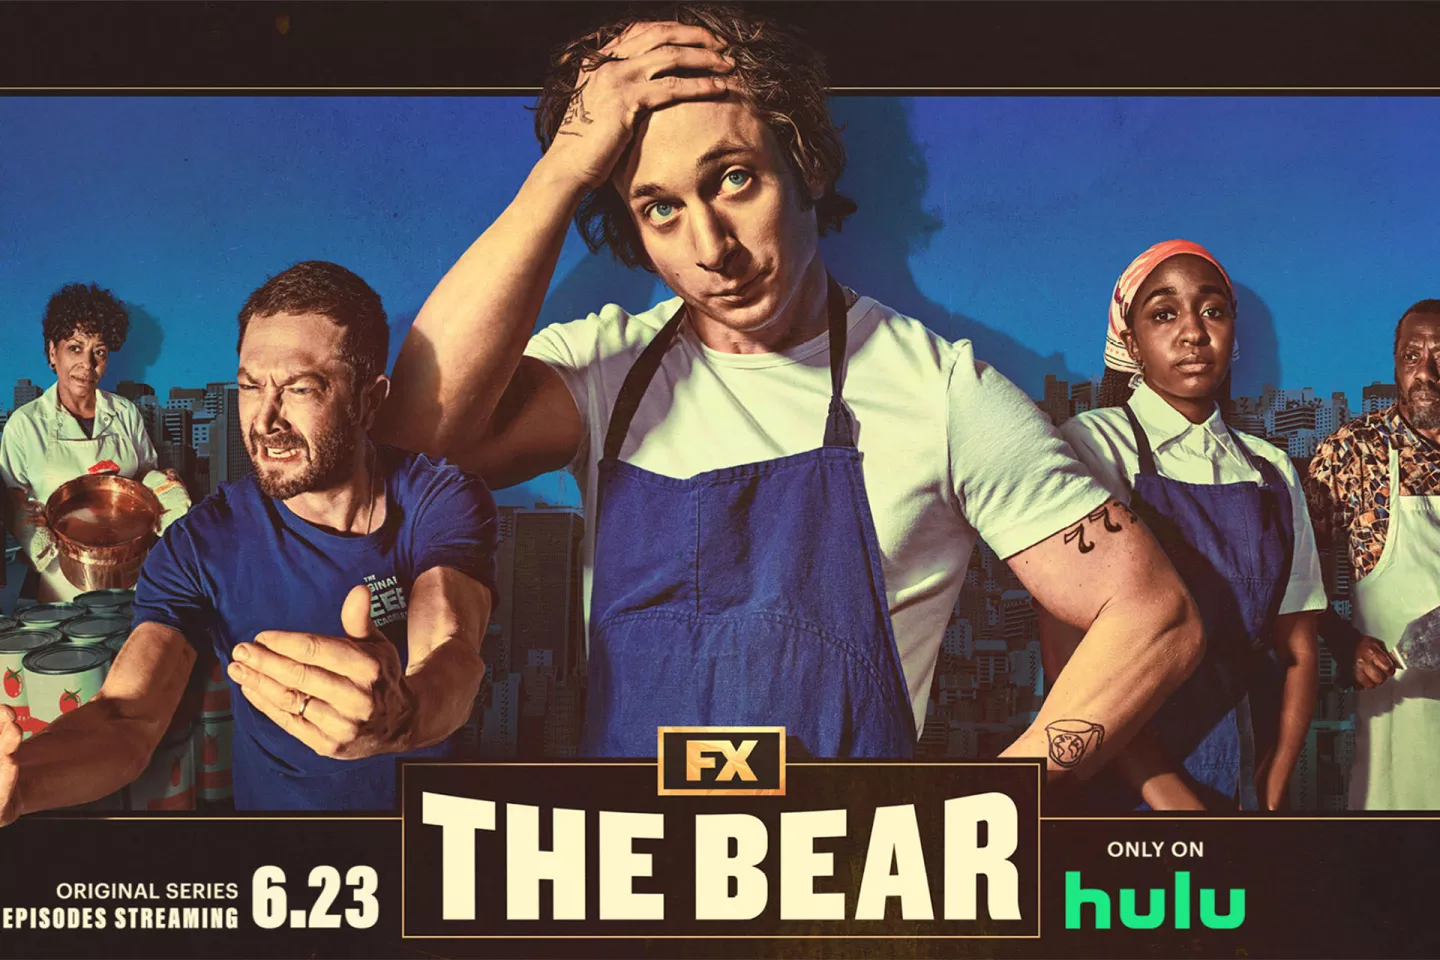 How The FX Show 'The Bear' Makes Food A Main Character